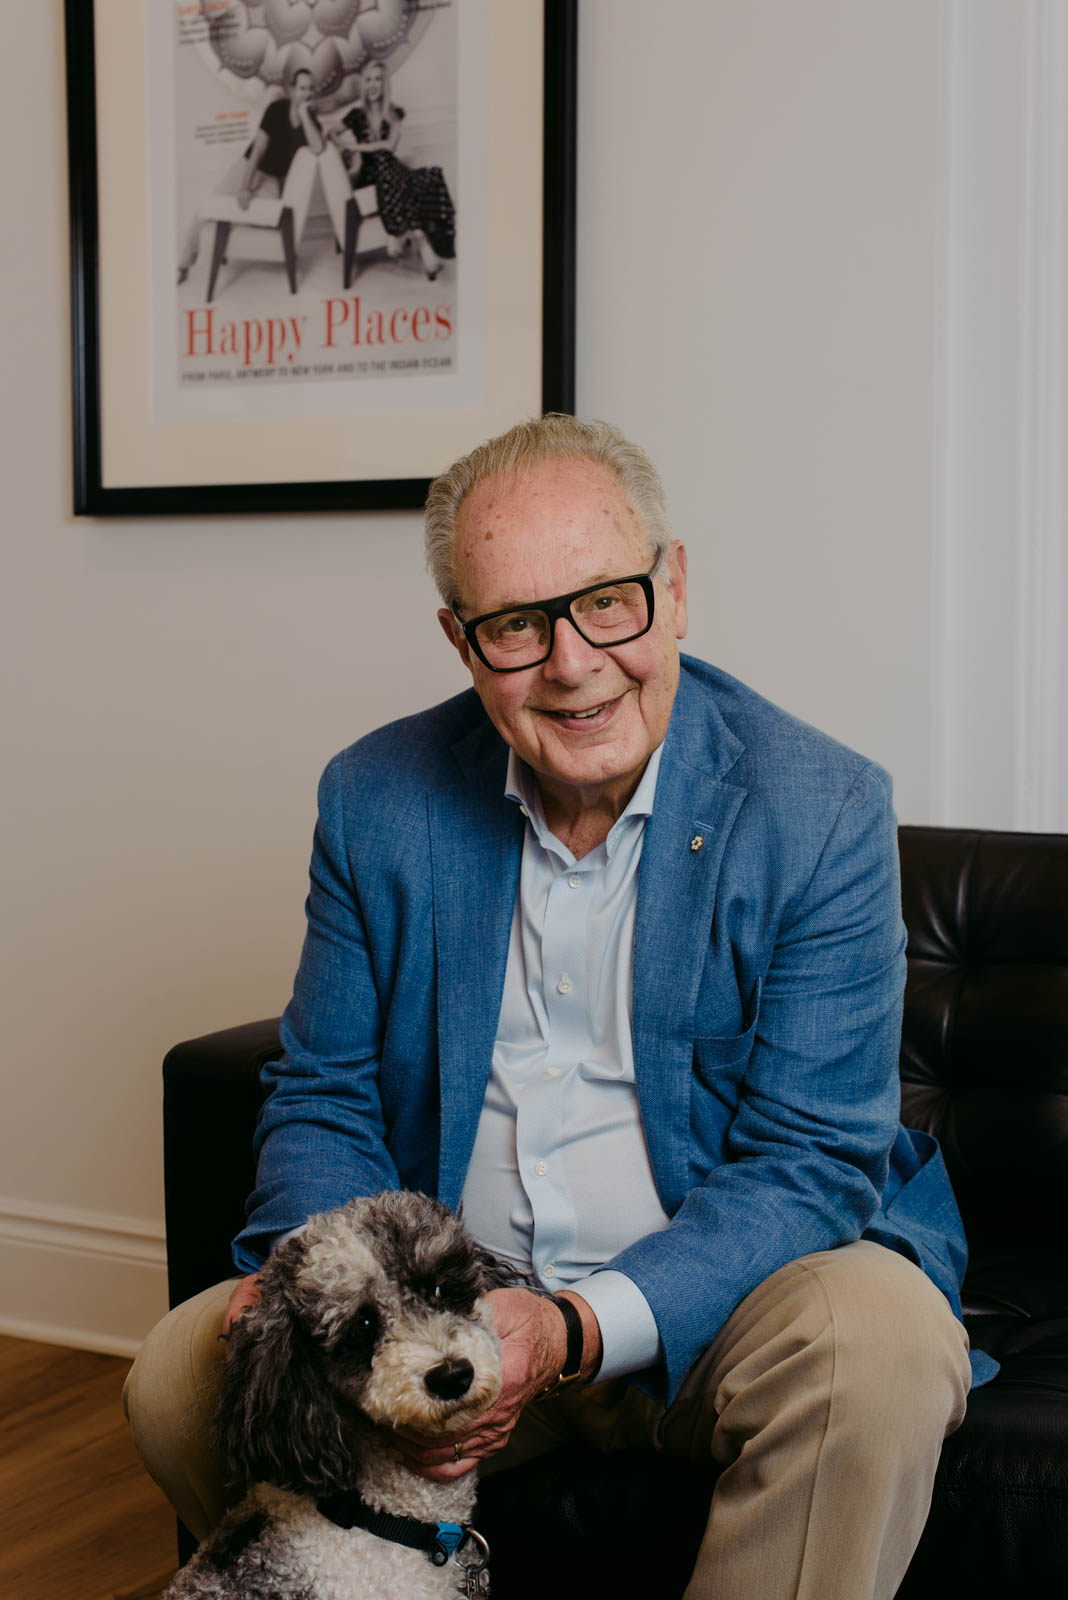 Real estate agent Frank O'Dea with dog sitting on a couch